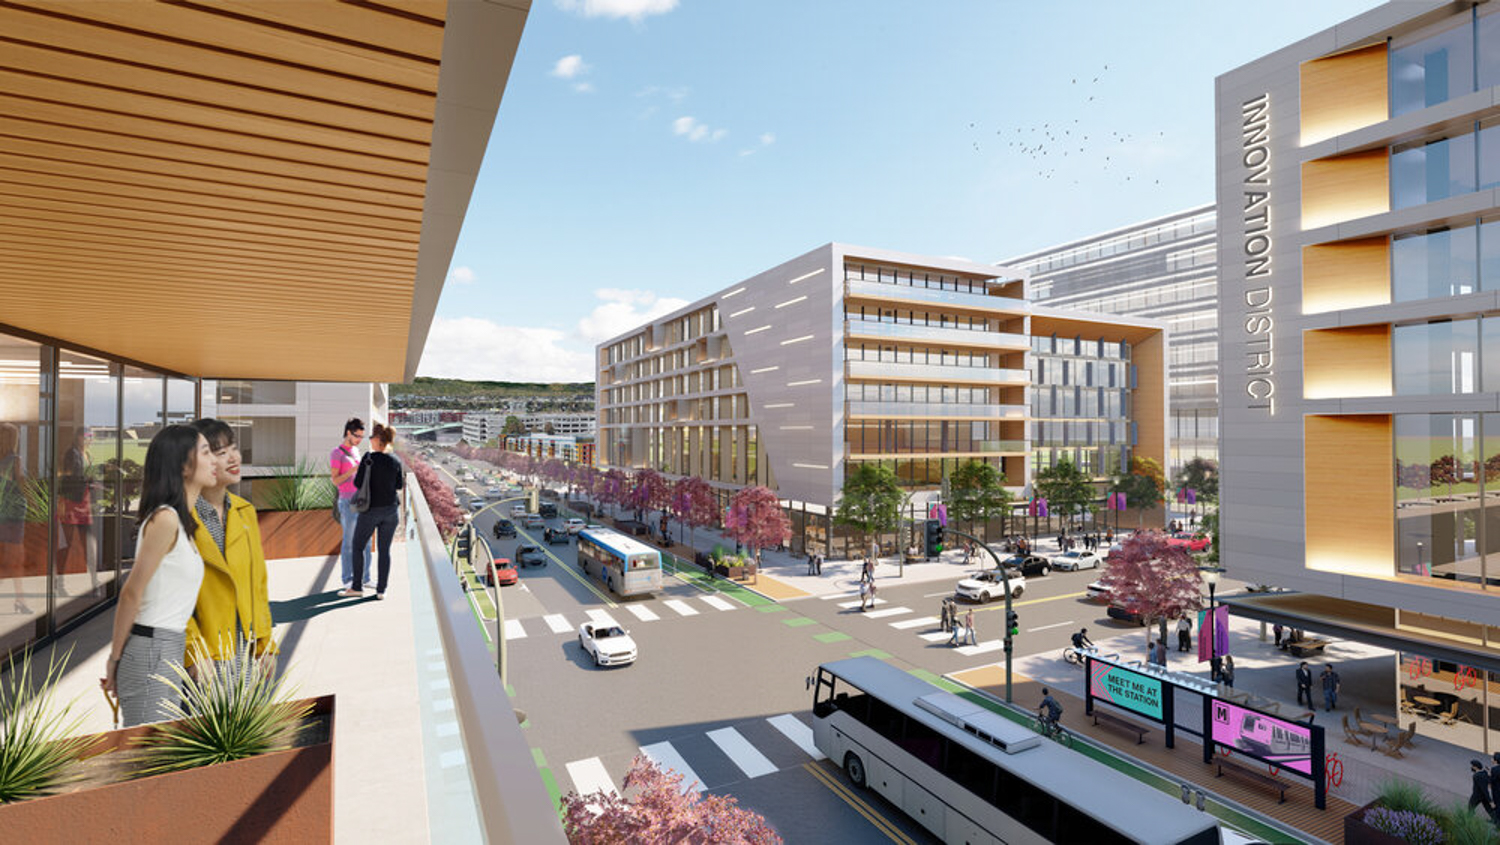 Innovation District, rendering via the City of Milpitas